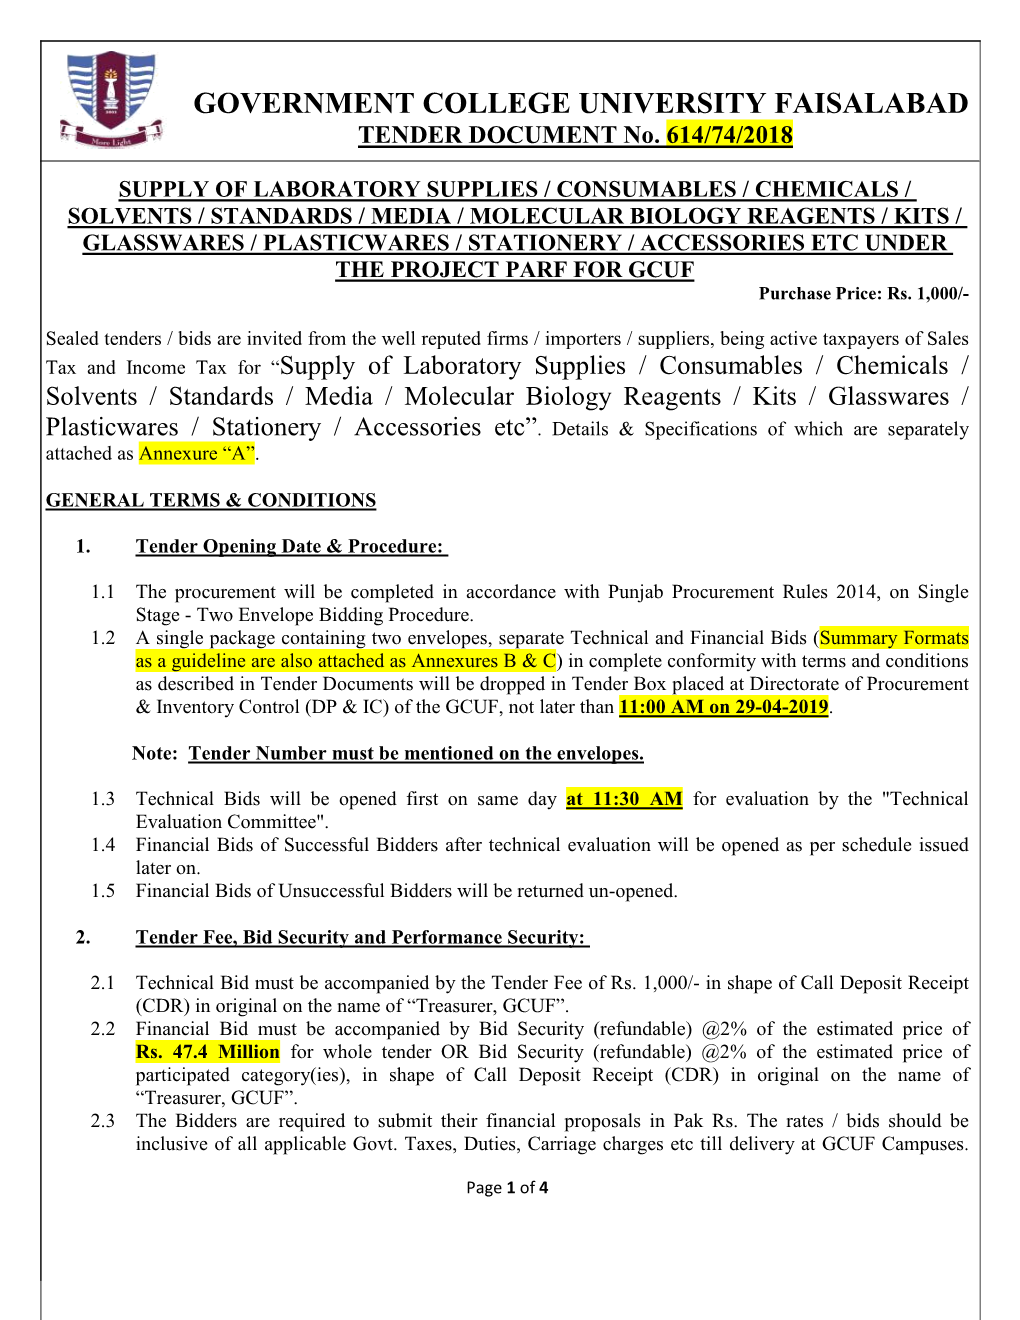 GOVERNMENT COLLEGE UNIVERSITY FAISALABAD TENDER DOCUMENT No